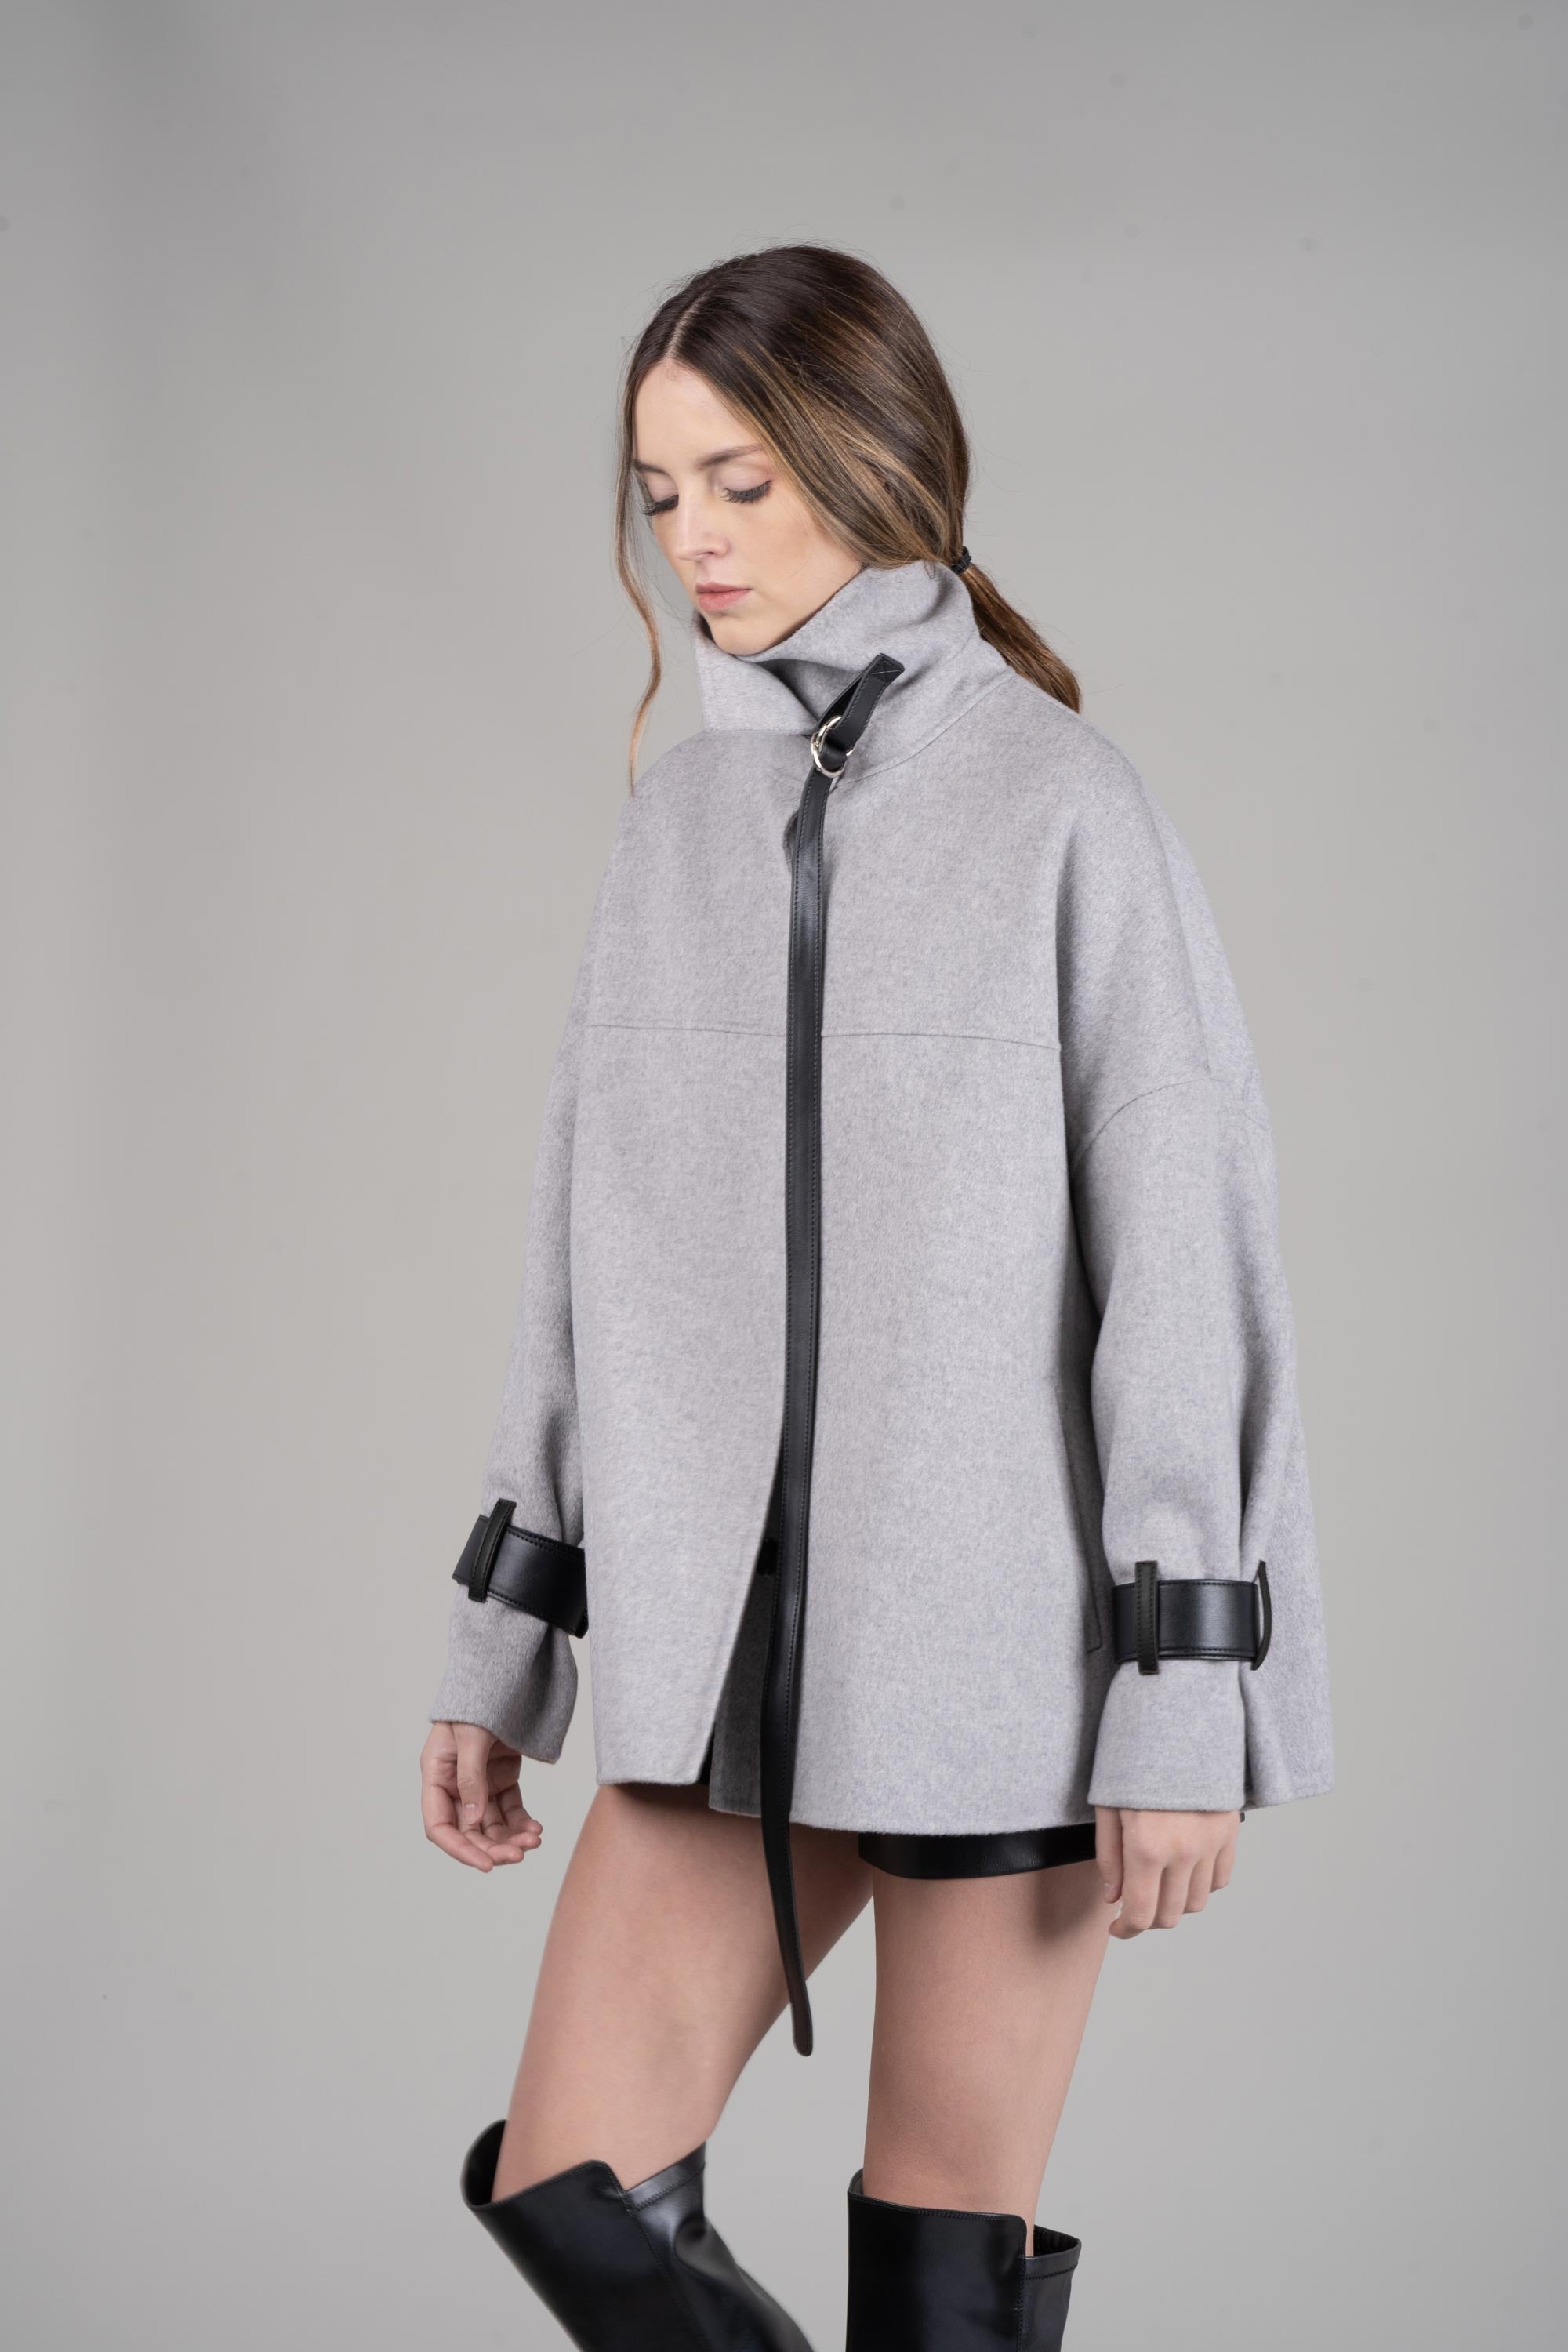 Cashmere Wool – Mute by JL